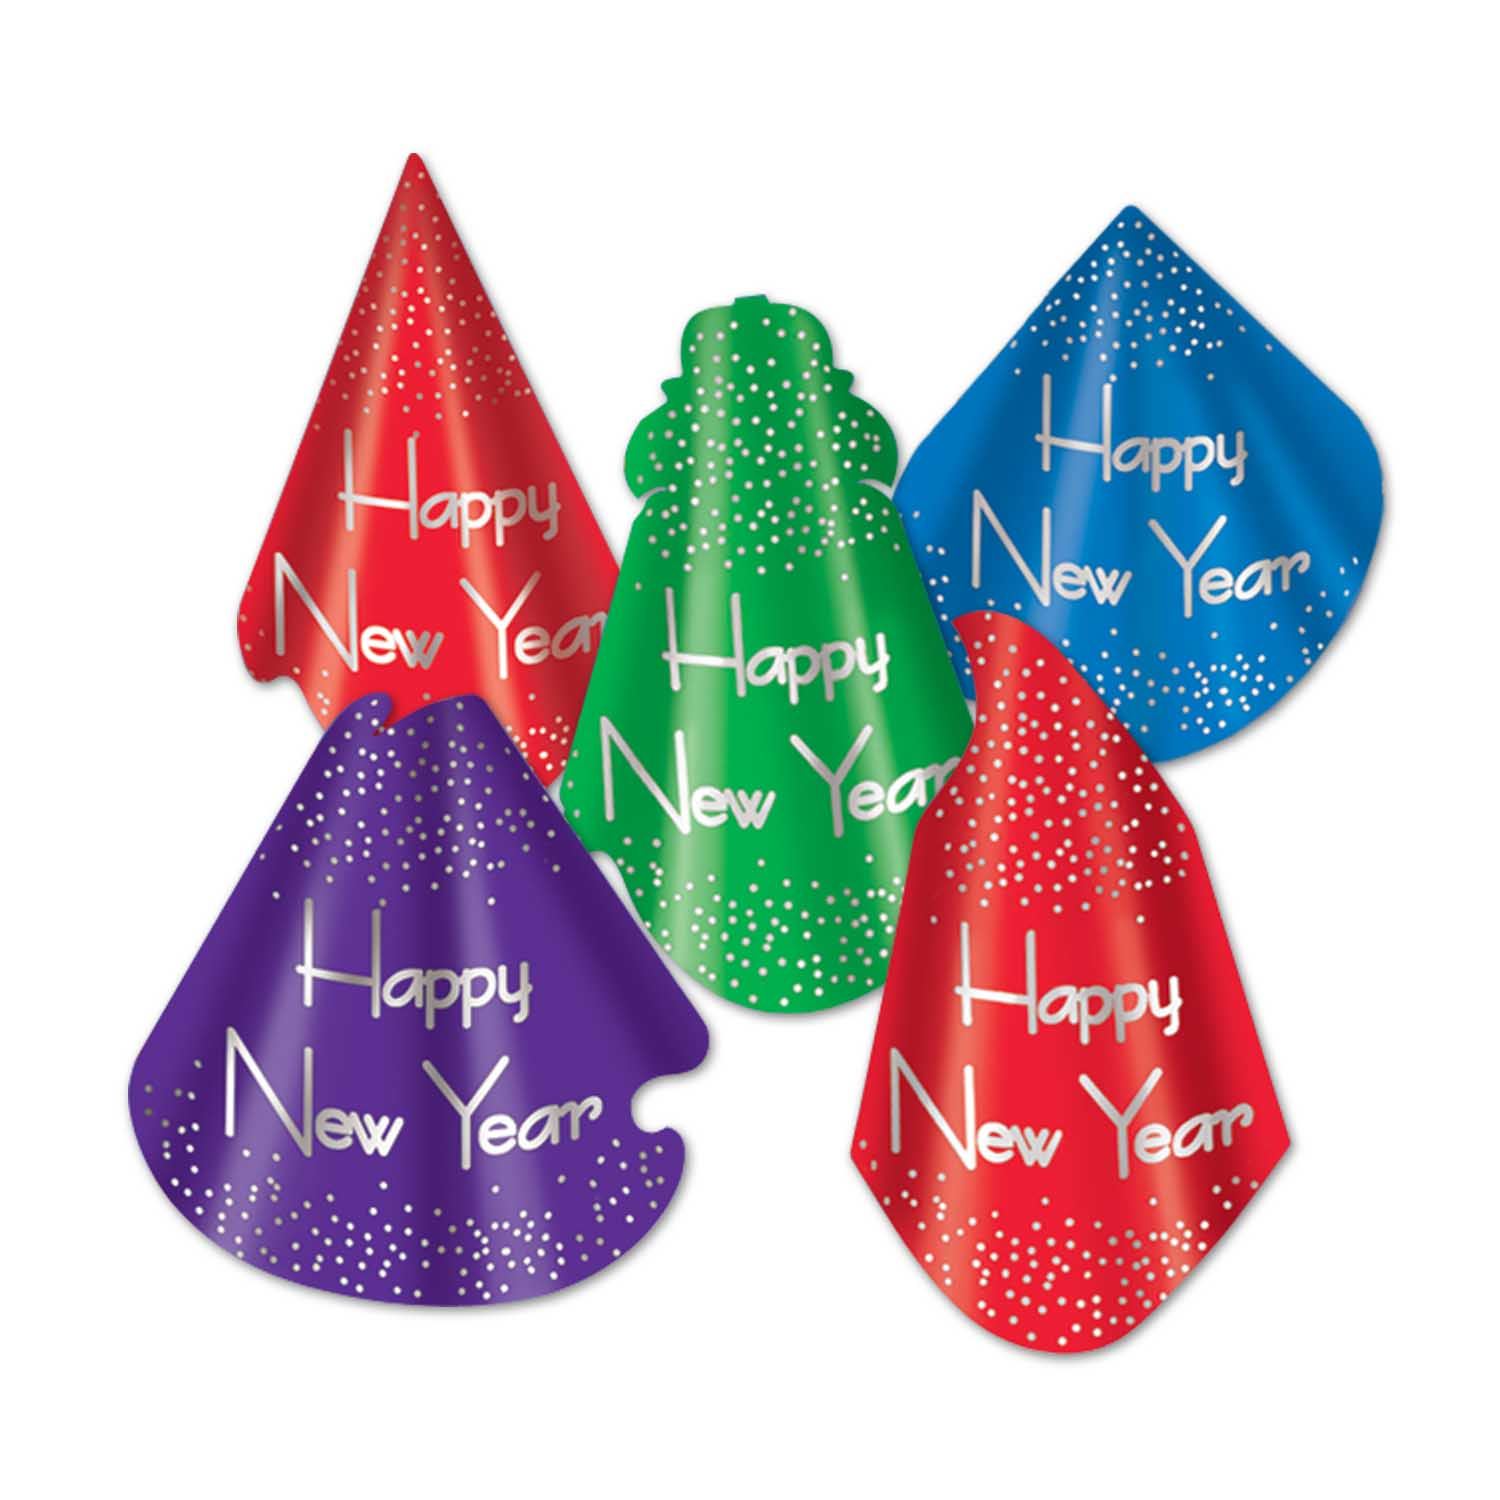 Traditional party hats in various colors that reads "Happy New Year" and includes confetti accents.